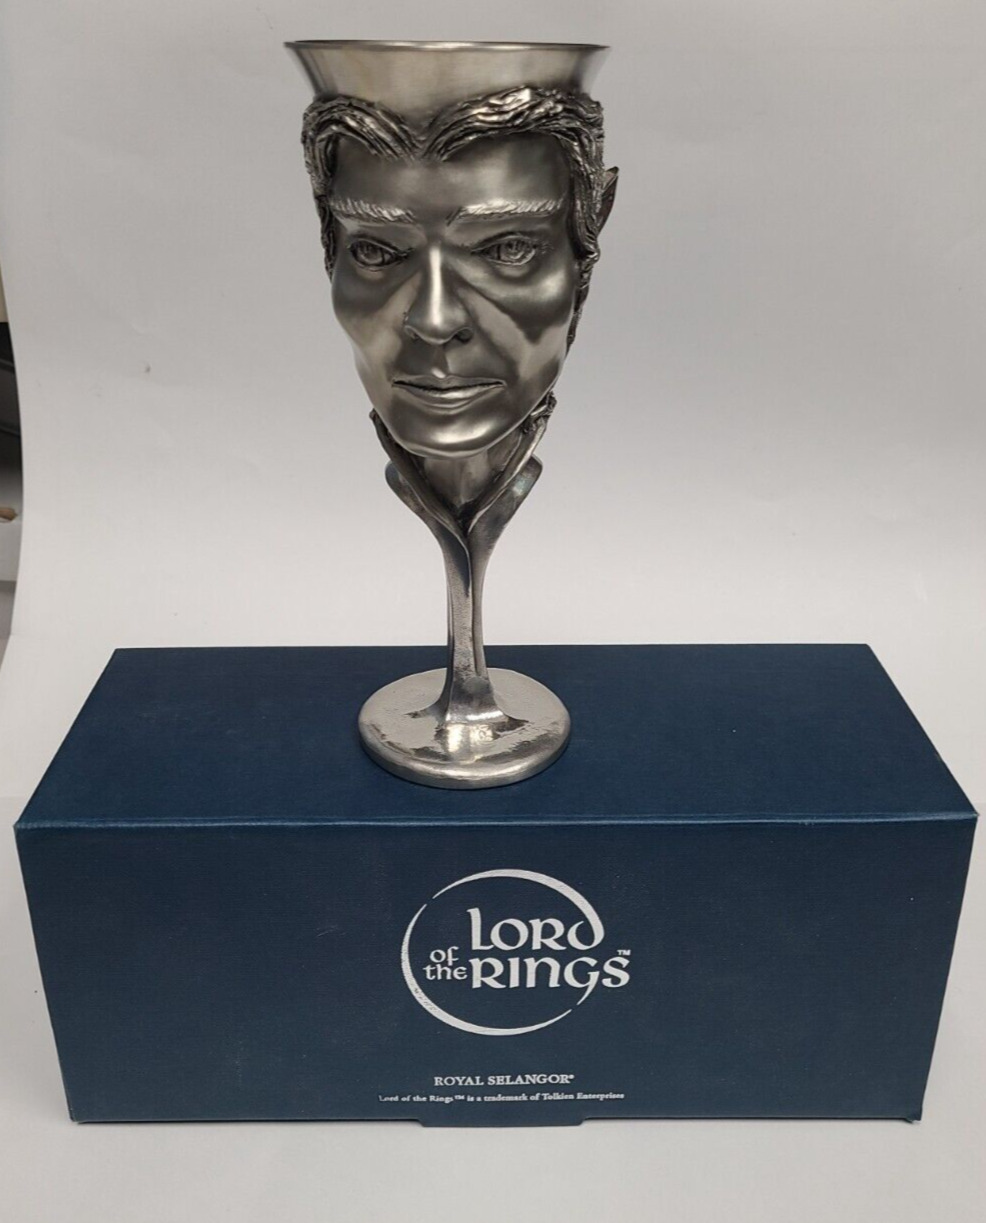 Legolas Pewter LOTR Royal Selangor LE Tolkien Goblet Signed Lord of the Rings